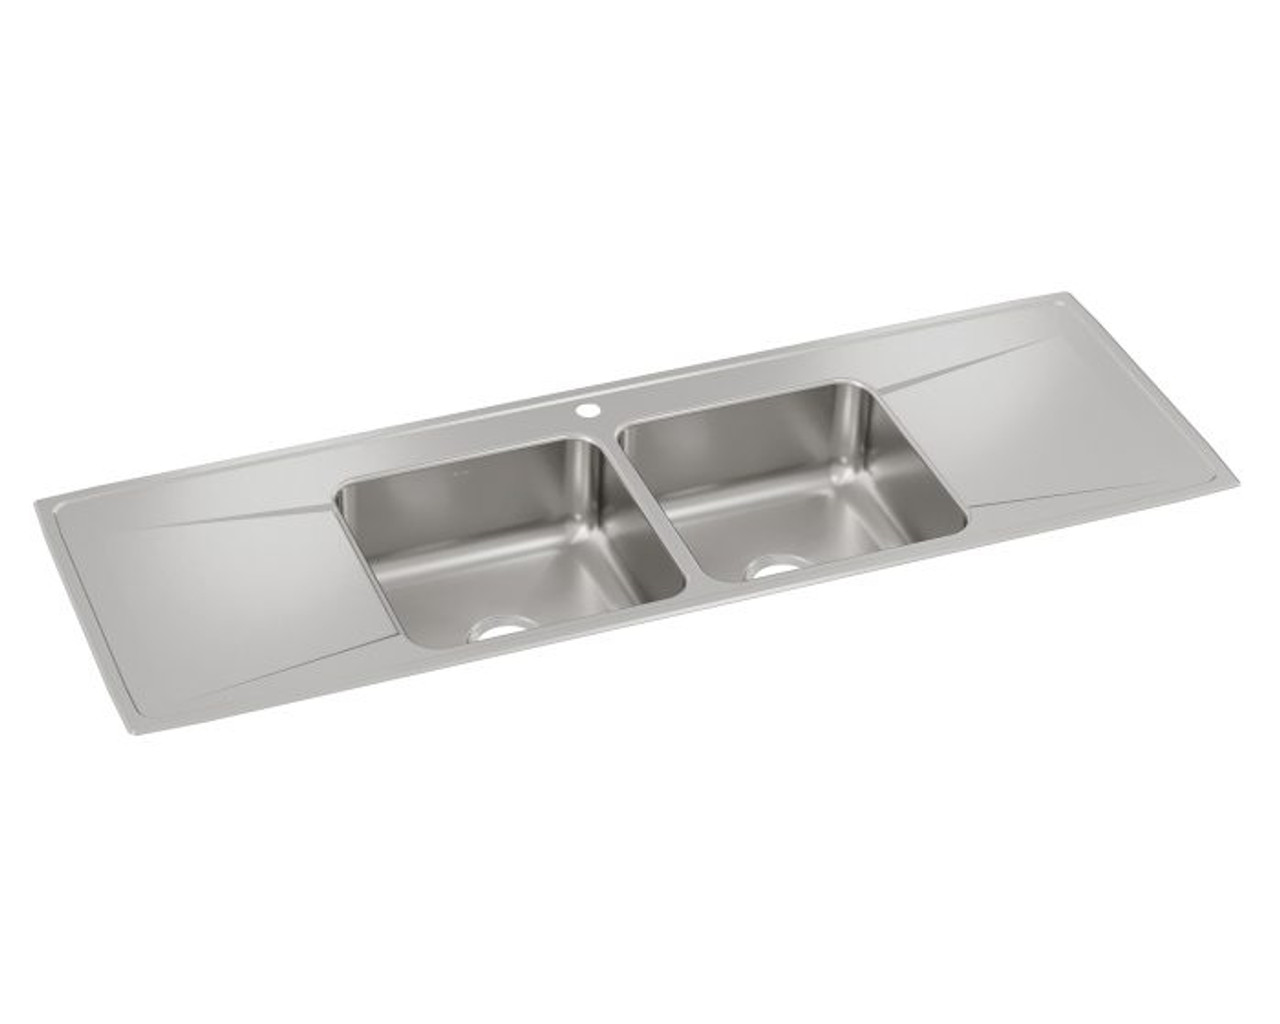 Drainboard Sinks: What to Know Before You Buy